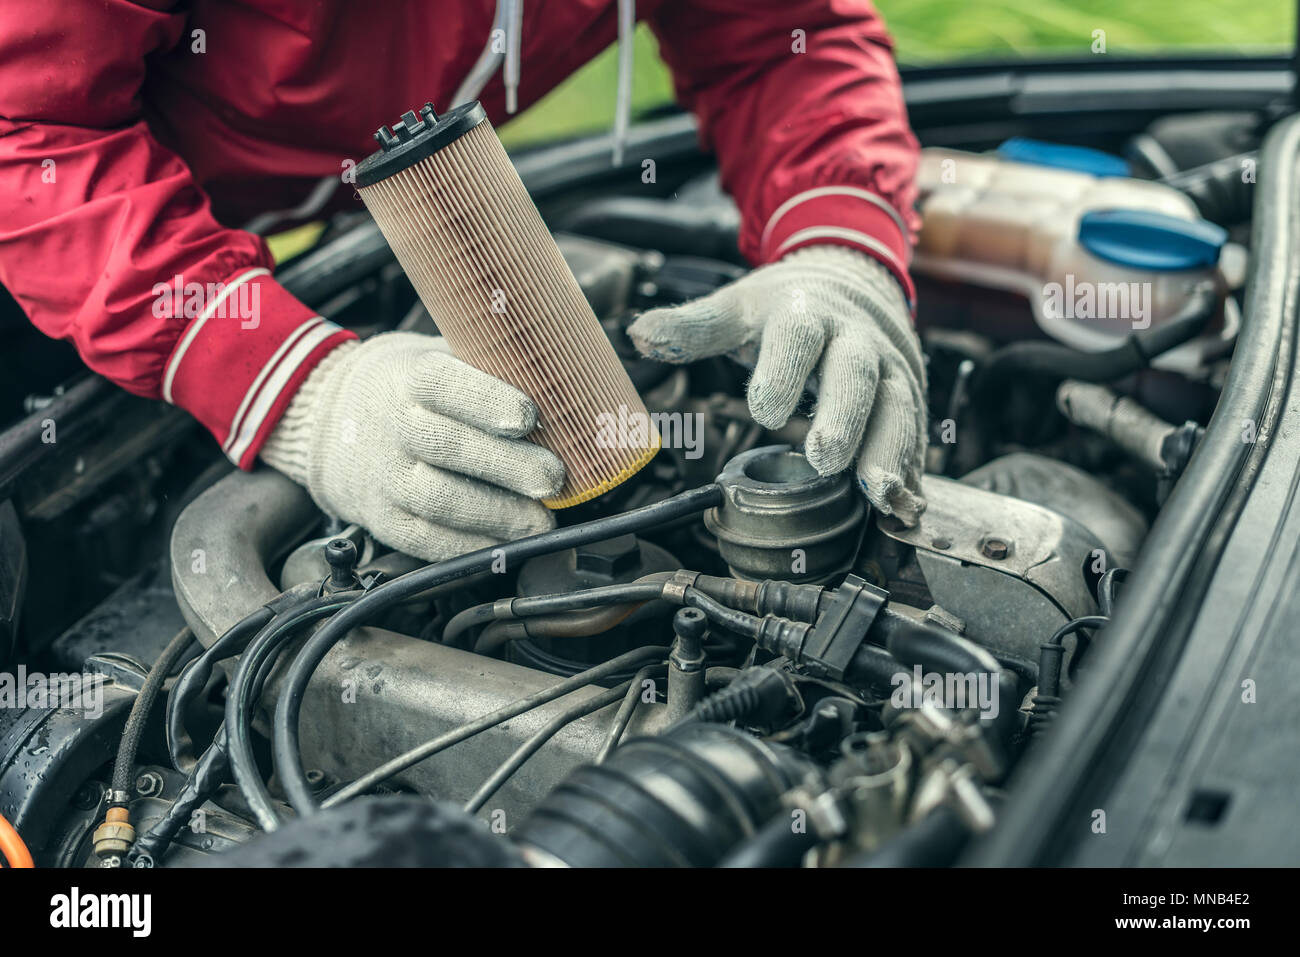 The auto mechanic replaces the car's oil filter. Stock Photo